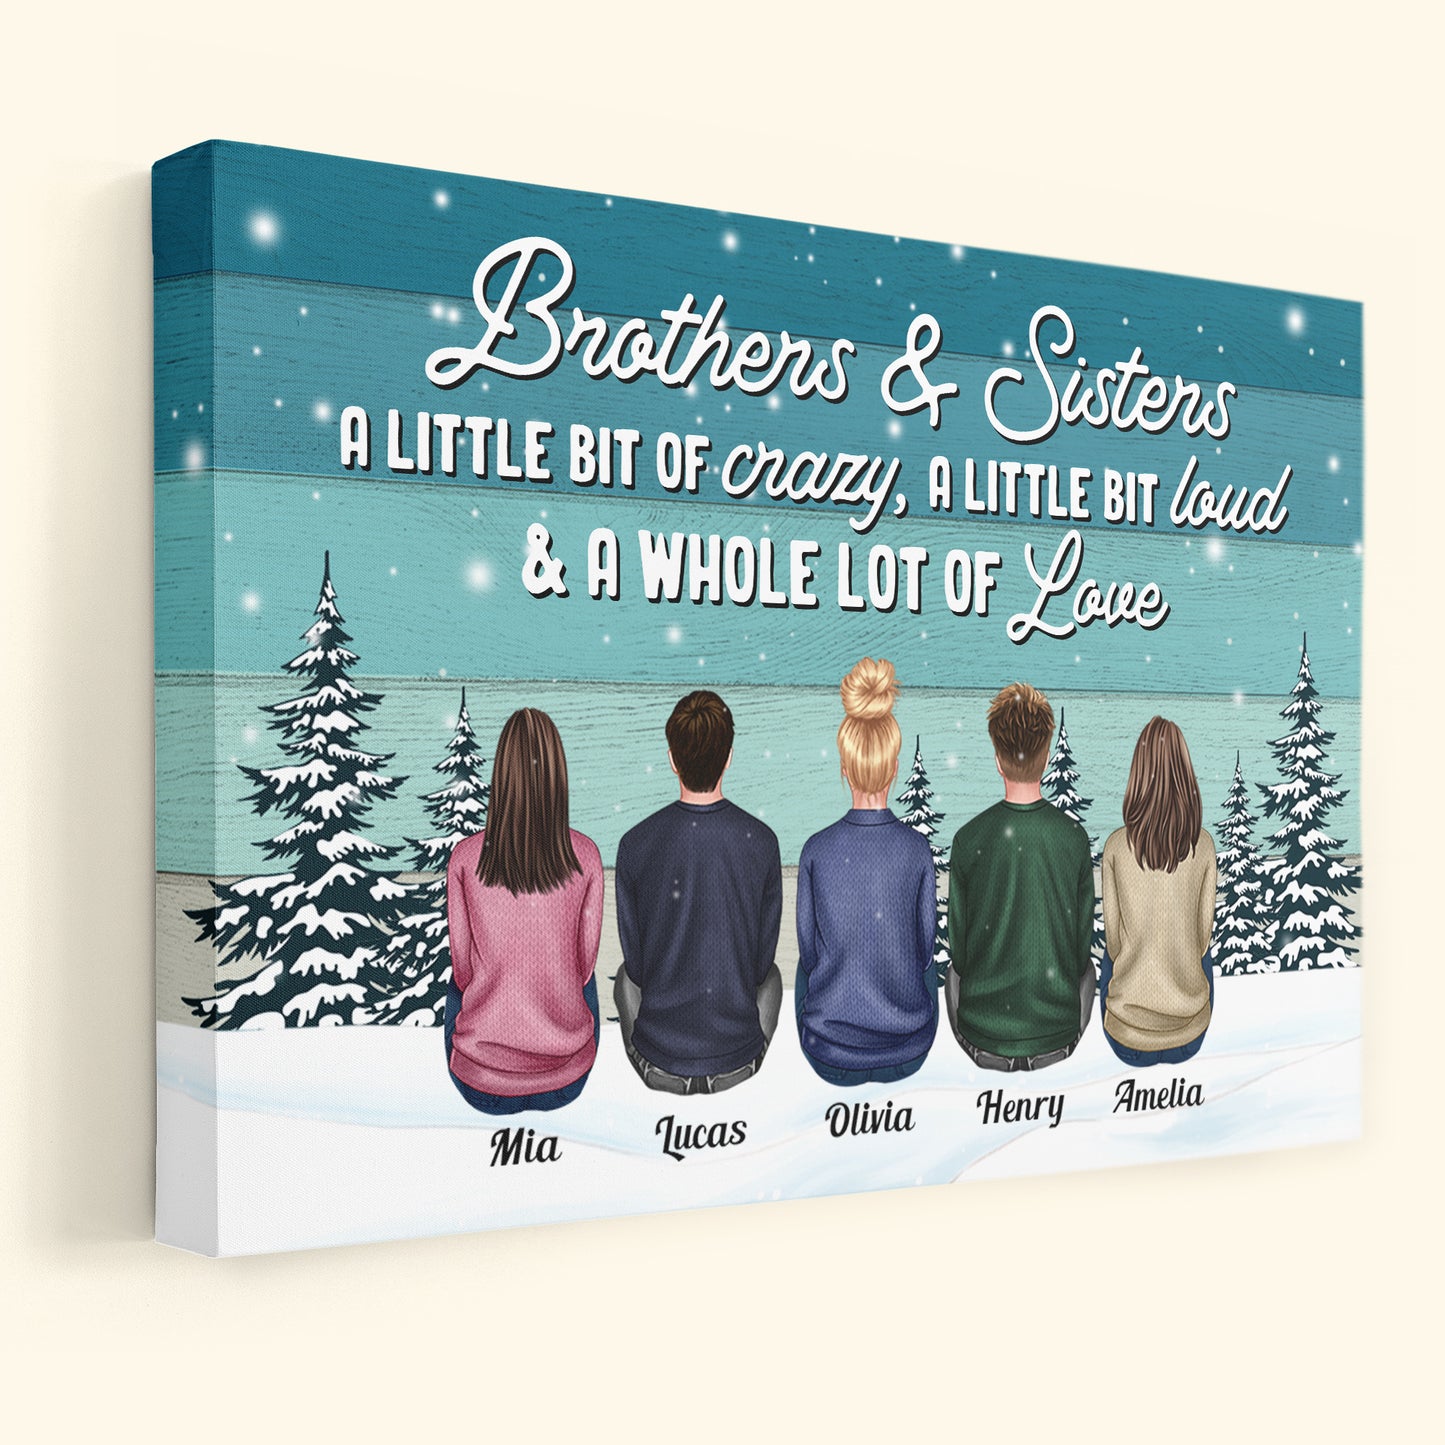 Brothers & Sisters A Little Bit Crazy, Loud A Whole Lot Of Love - Personalized Canvas - Christmas Gift For Brothers & Sisters, Siblings, Cousins - Family Sitting